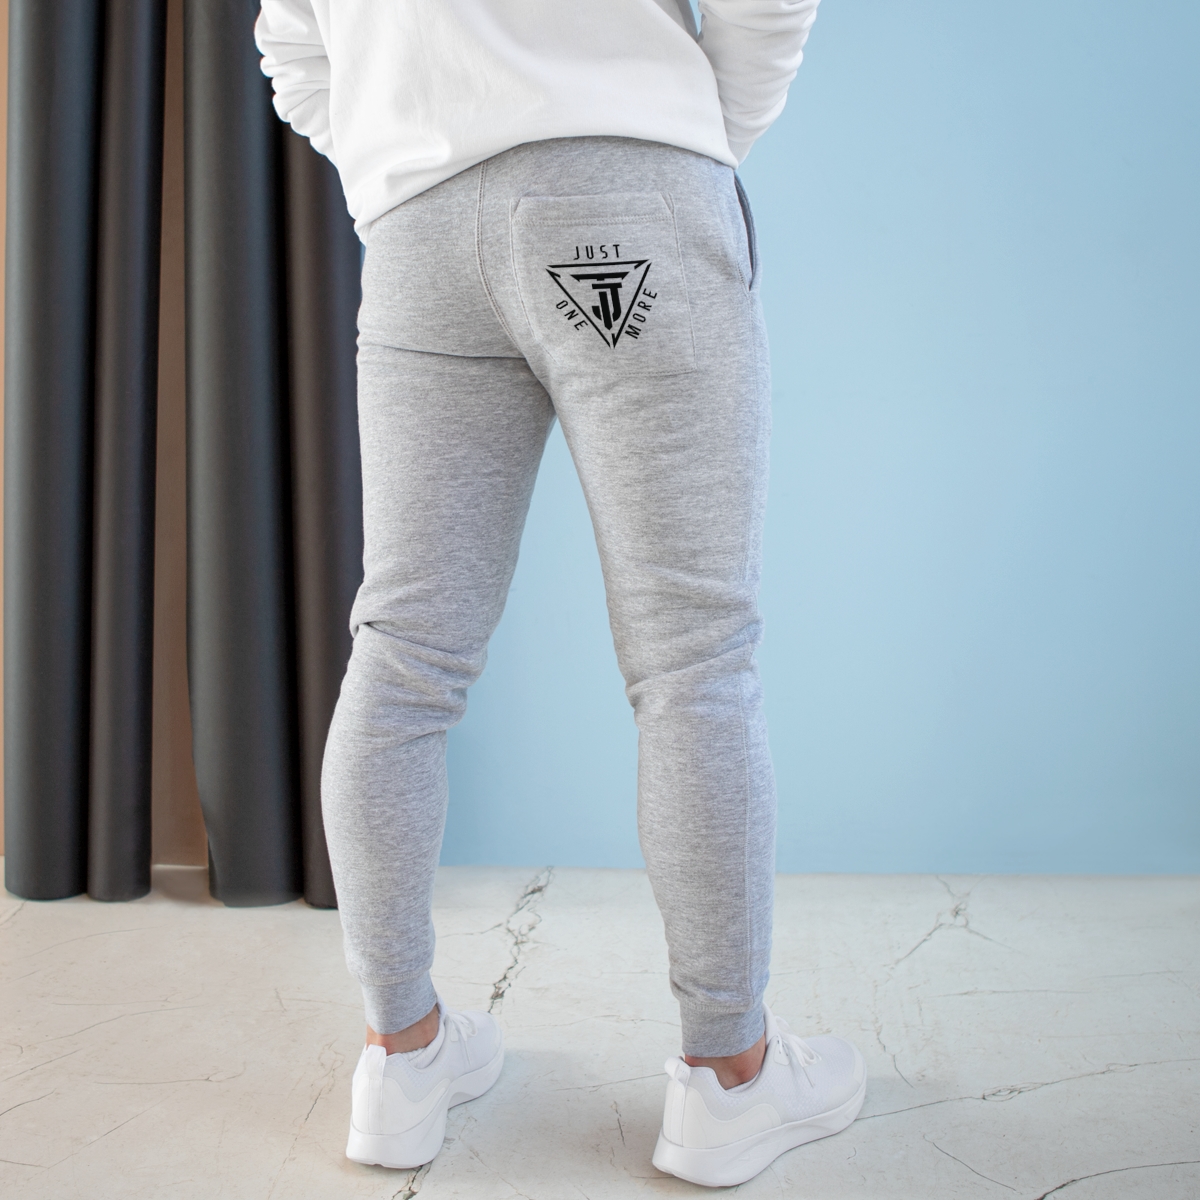 Unisex Fleece Joggers "Just One More" product main image